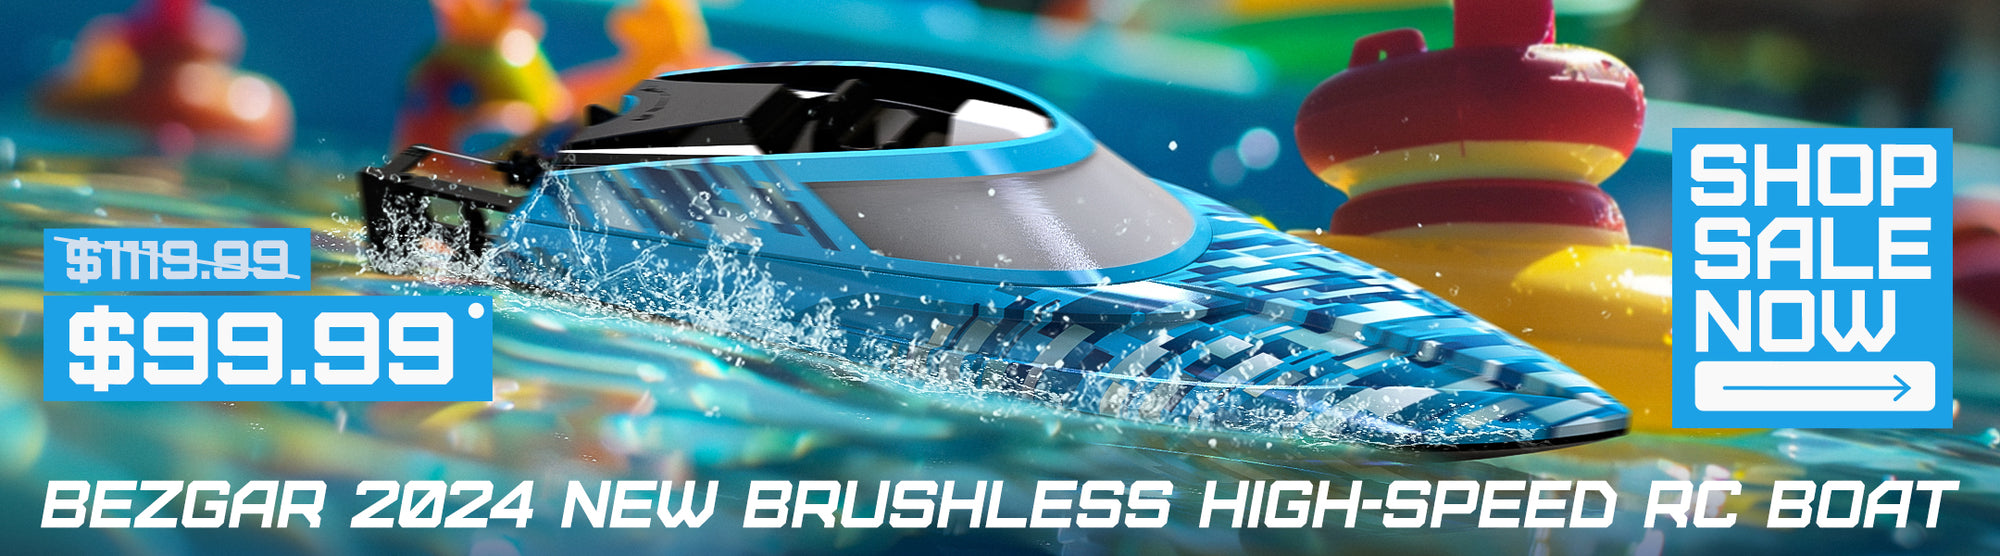 Bezgar TX124 - New Release Brushless RC Boat